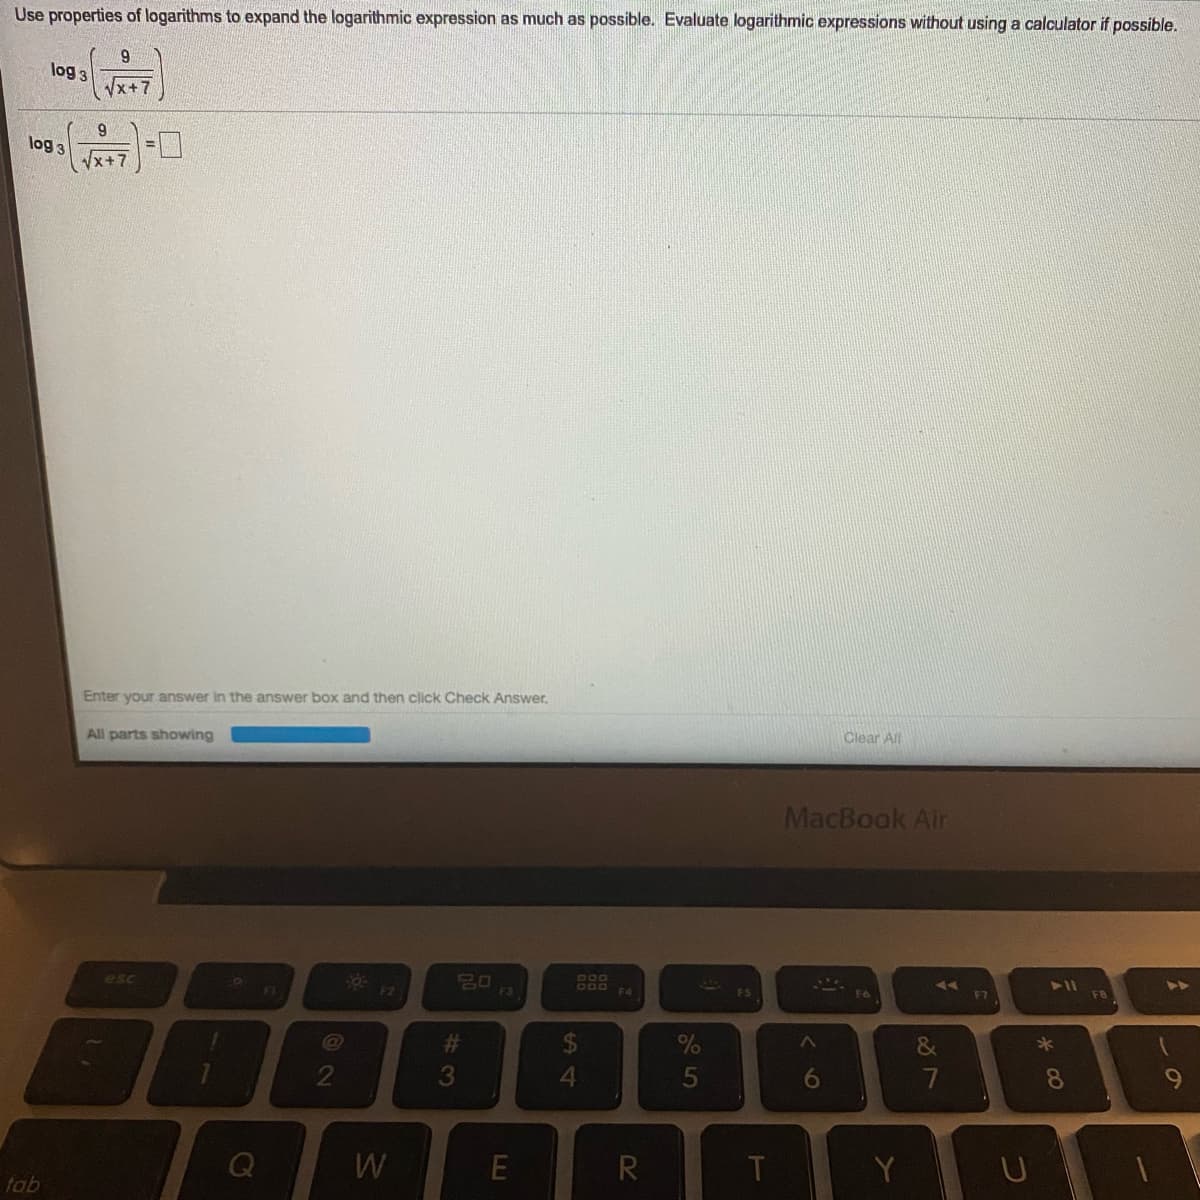 Use properties of logarithms to expand the logarithmic expression as much as possible. Evaluate logarithmic expressions without using a calculator if possible.
9.
log 3
Vx+7
log 3
x+7
Enter your answer in the answer box and then click Check Answer.
All parts showing
Clear All
MacBook Air
esc
20
F3
411
B00
FI
F2
F4
F7
F8
%23
&
2
3
4.
6.
8.
R
Y
tab
LU
Ca
